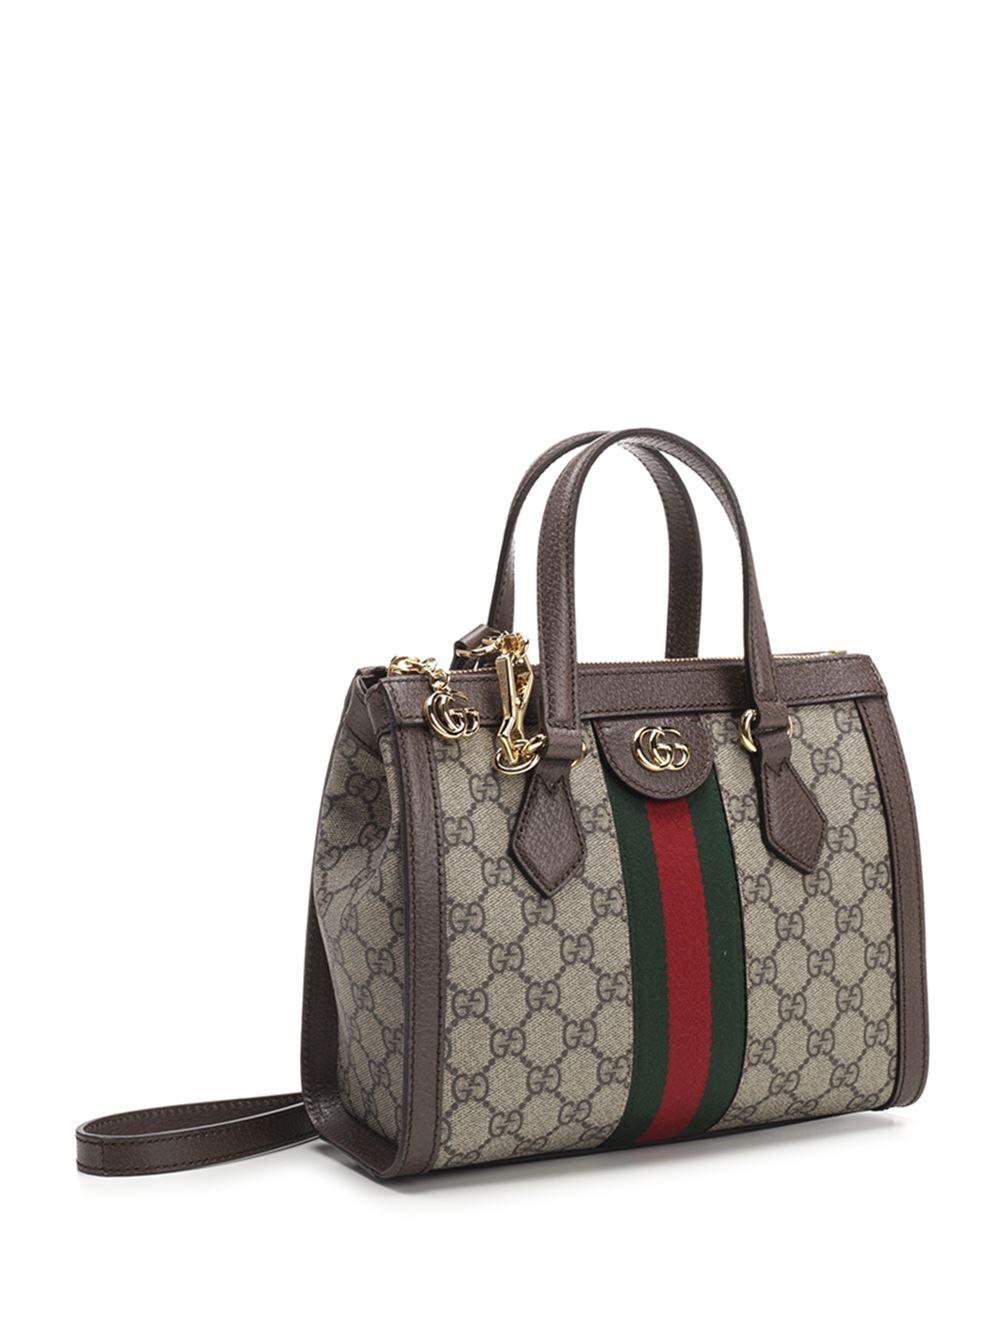 Gucci Canvas Ophidia Gg Medium Tote Bag in Beige (Green) - Save 48% | Lyst